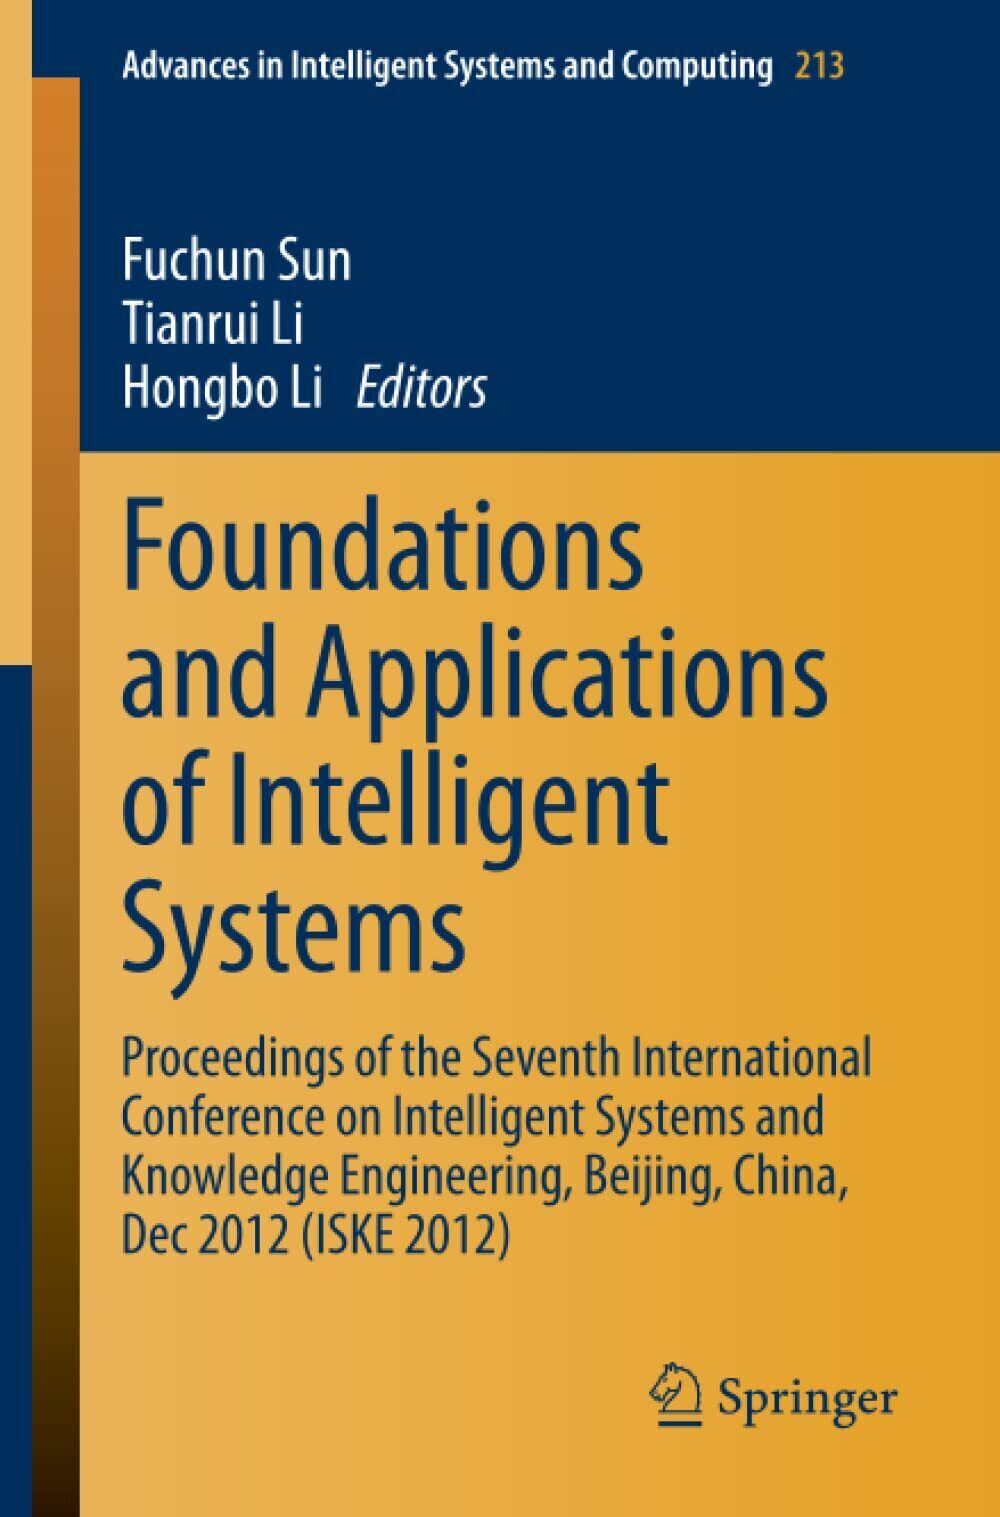 Foundations and Applications of Intelligent Systems - Fuchun Sun - 2013